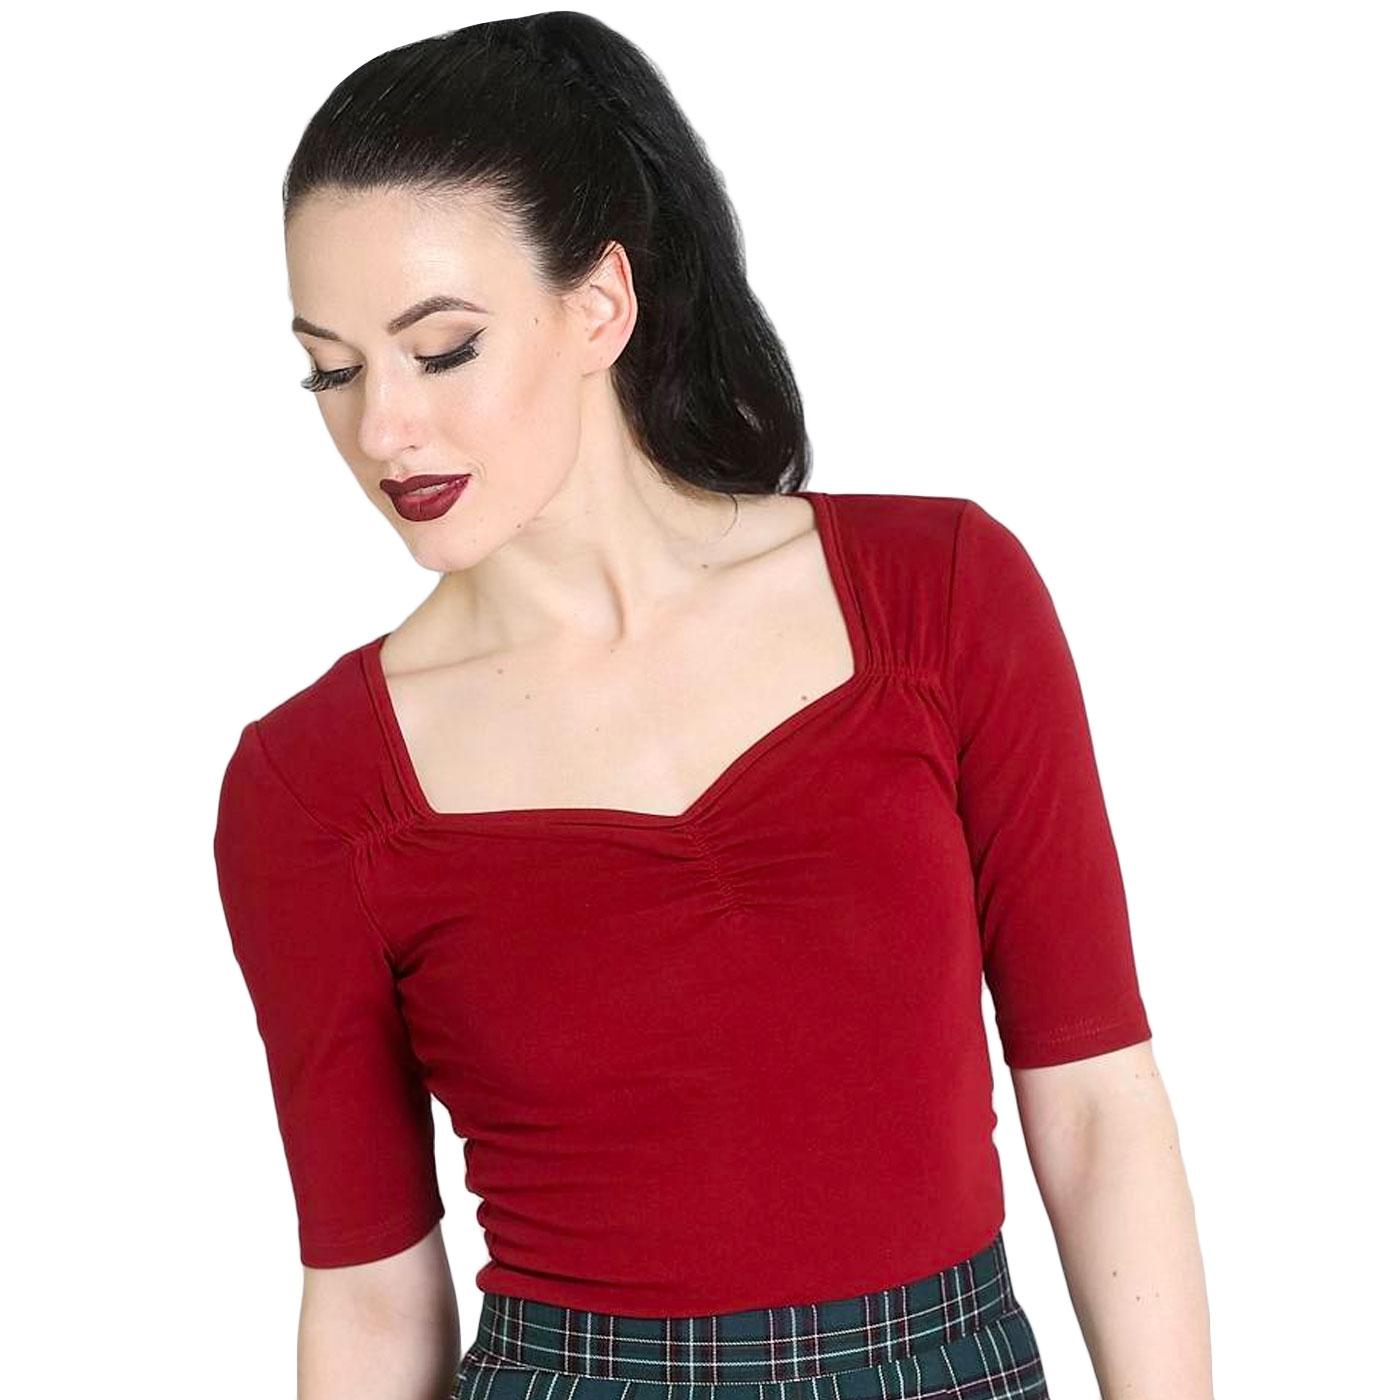 Philippa HELL BUNNY 1950s Vintage Top In Burgundy